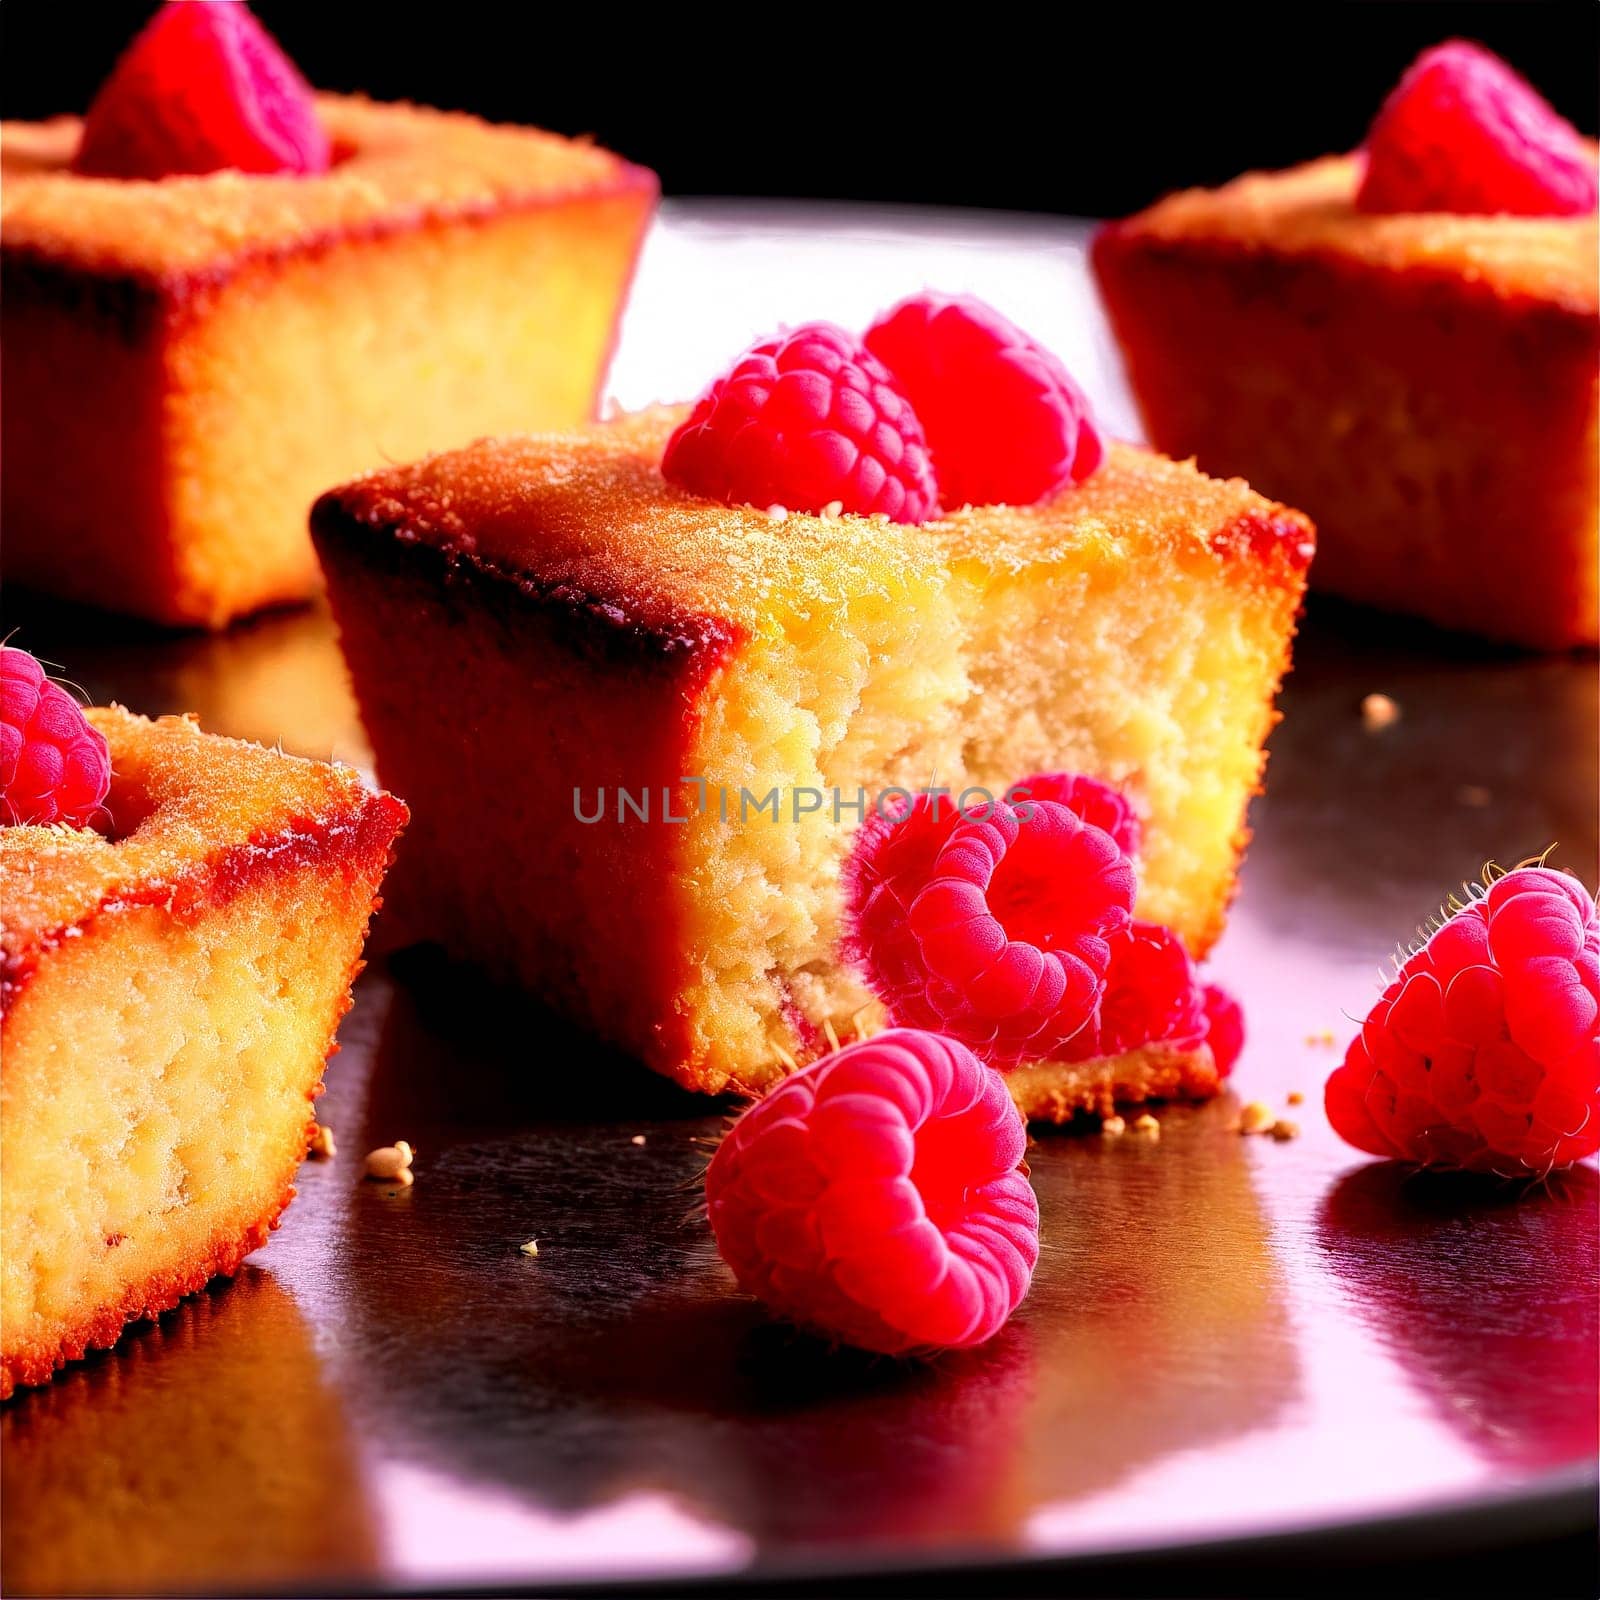 Raspberry financiers golden almond cakes fresh raspberries tumbling Food and Culinary concept by panophotograph